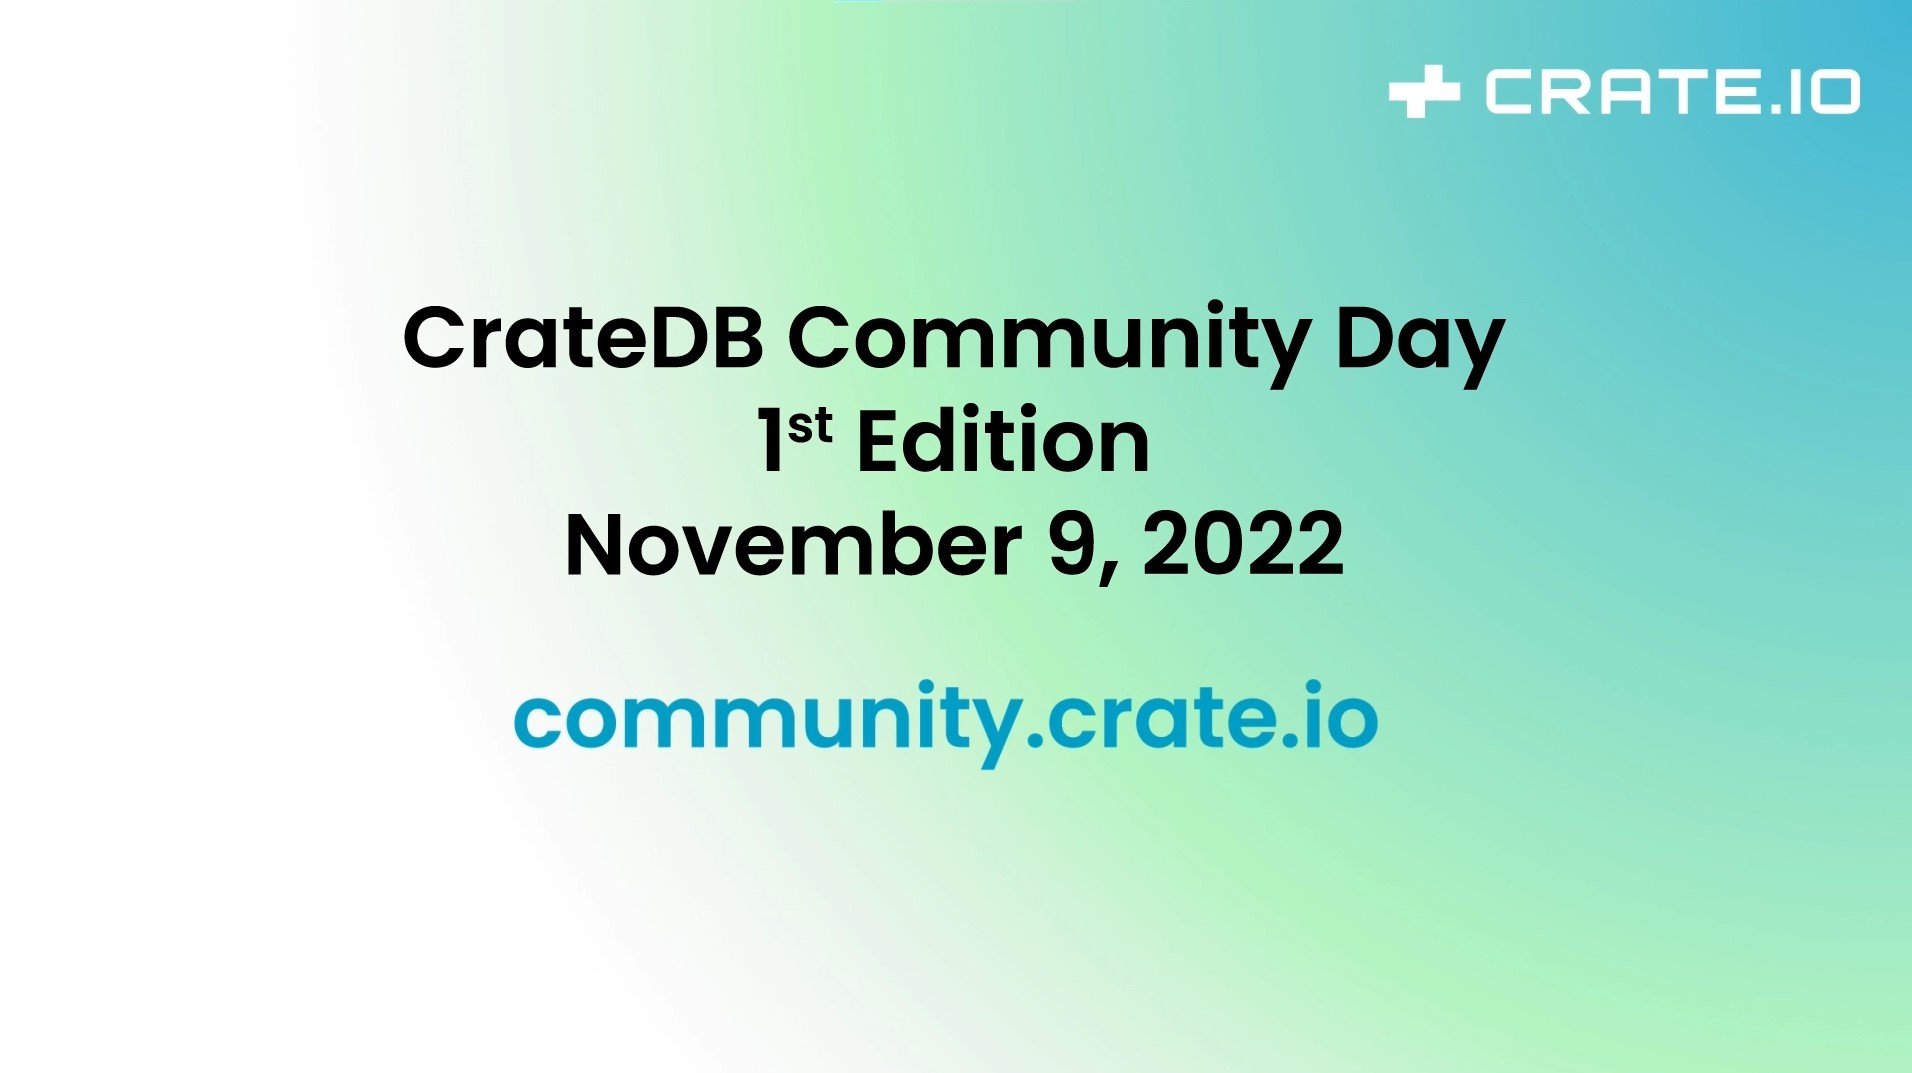 CrateDB Community Day first edition